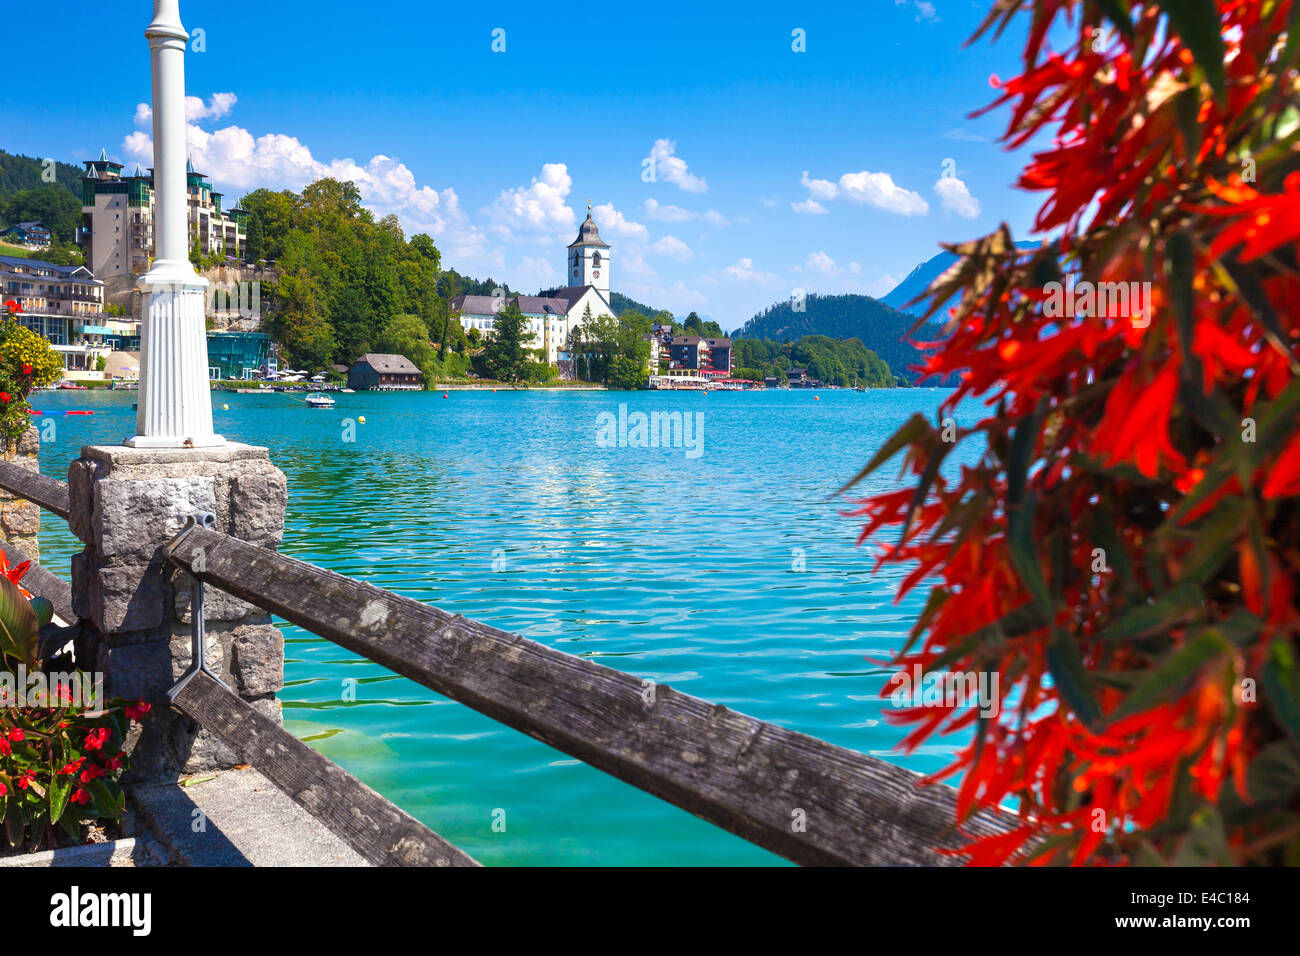 View of St. Wolfgang waterfront with Wolfgangsee lake, Austria Stock Photo